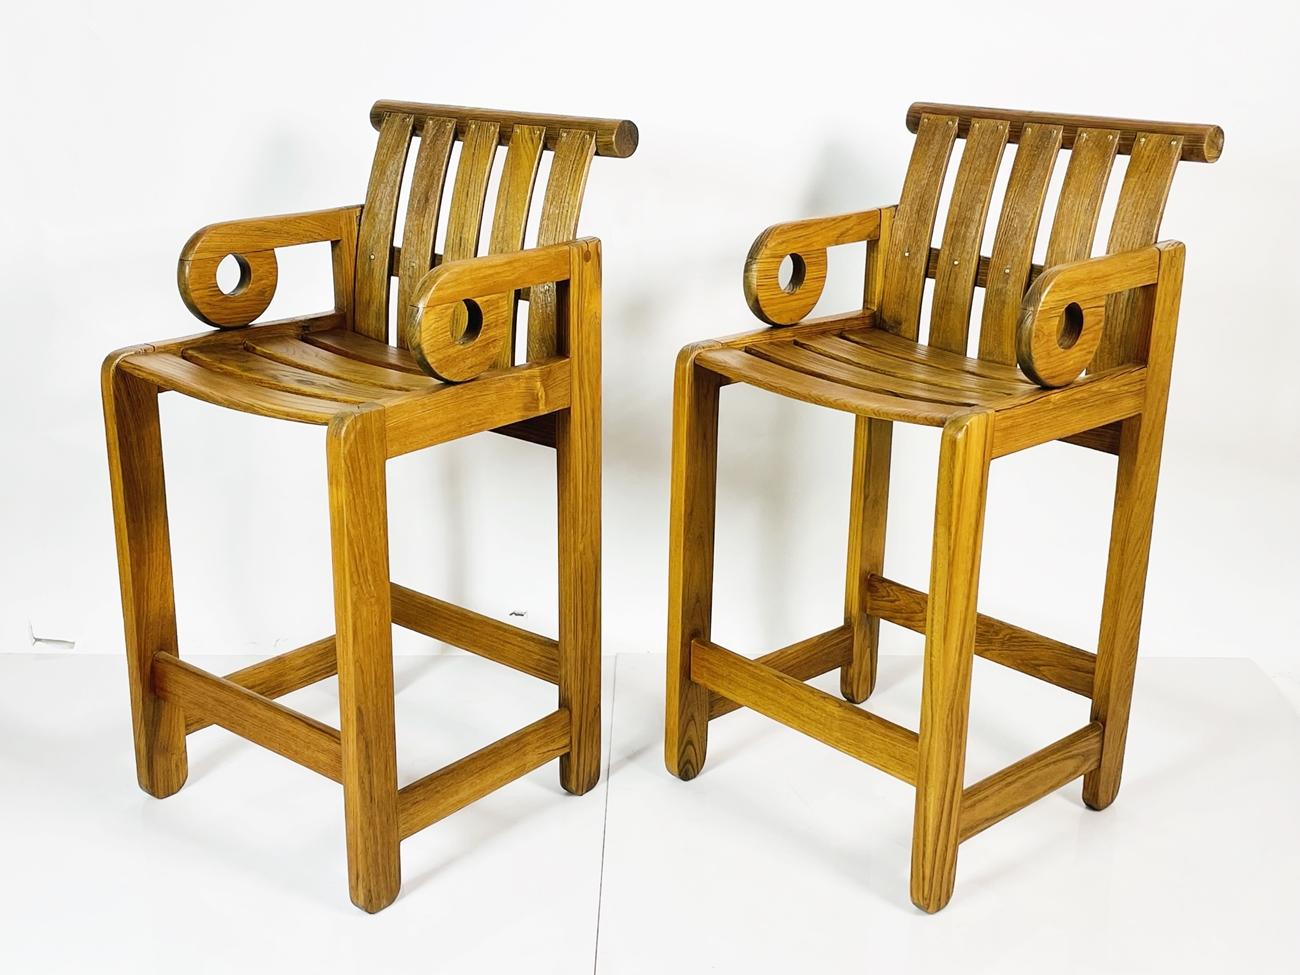 An early and rare pair of Aperture barstools in teak by Monterey, California, designer, architect, and artist Kipp Stewart for Summit Furniture.

Impressively handcrafted of very substantial solid teak. Bold geometric lines and forms on display from